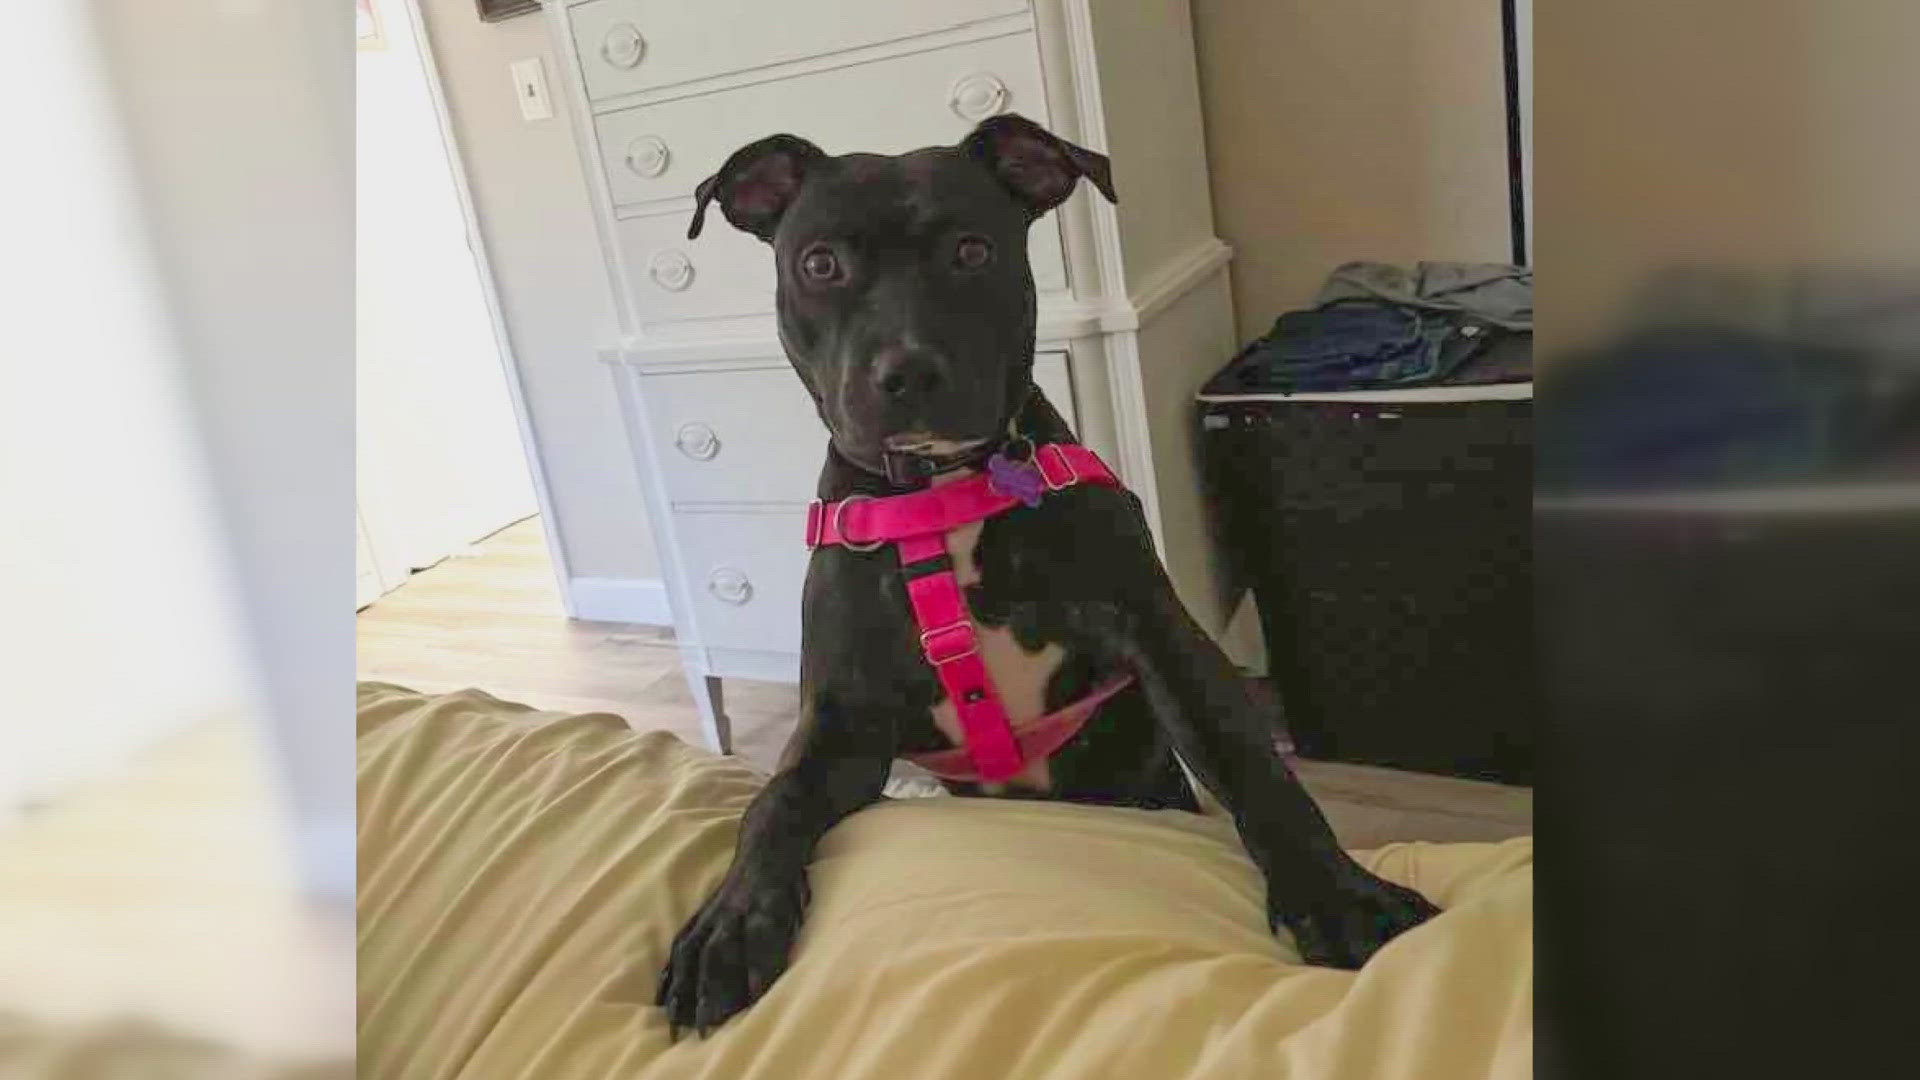 Olive's foster mom said it's surprising she hasn't found her family yet.